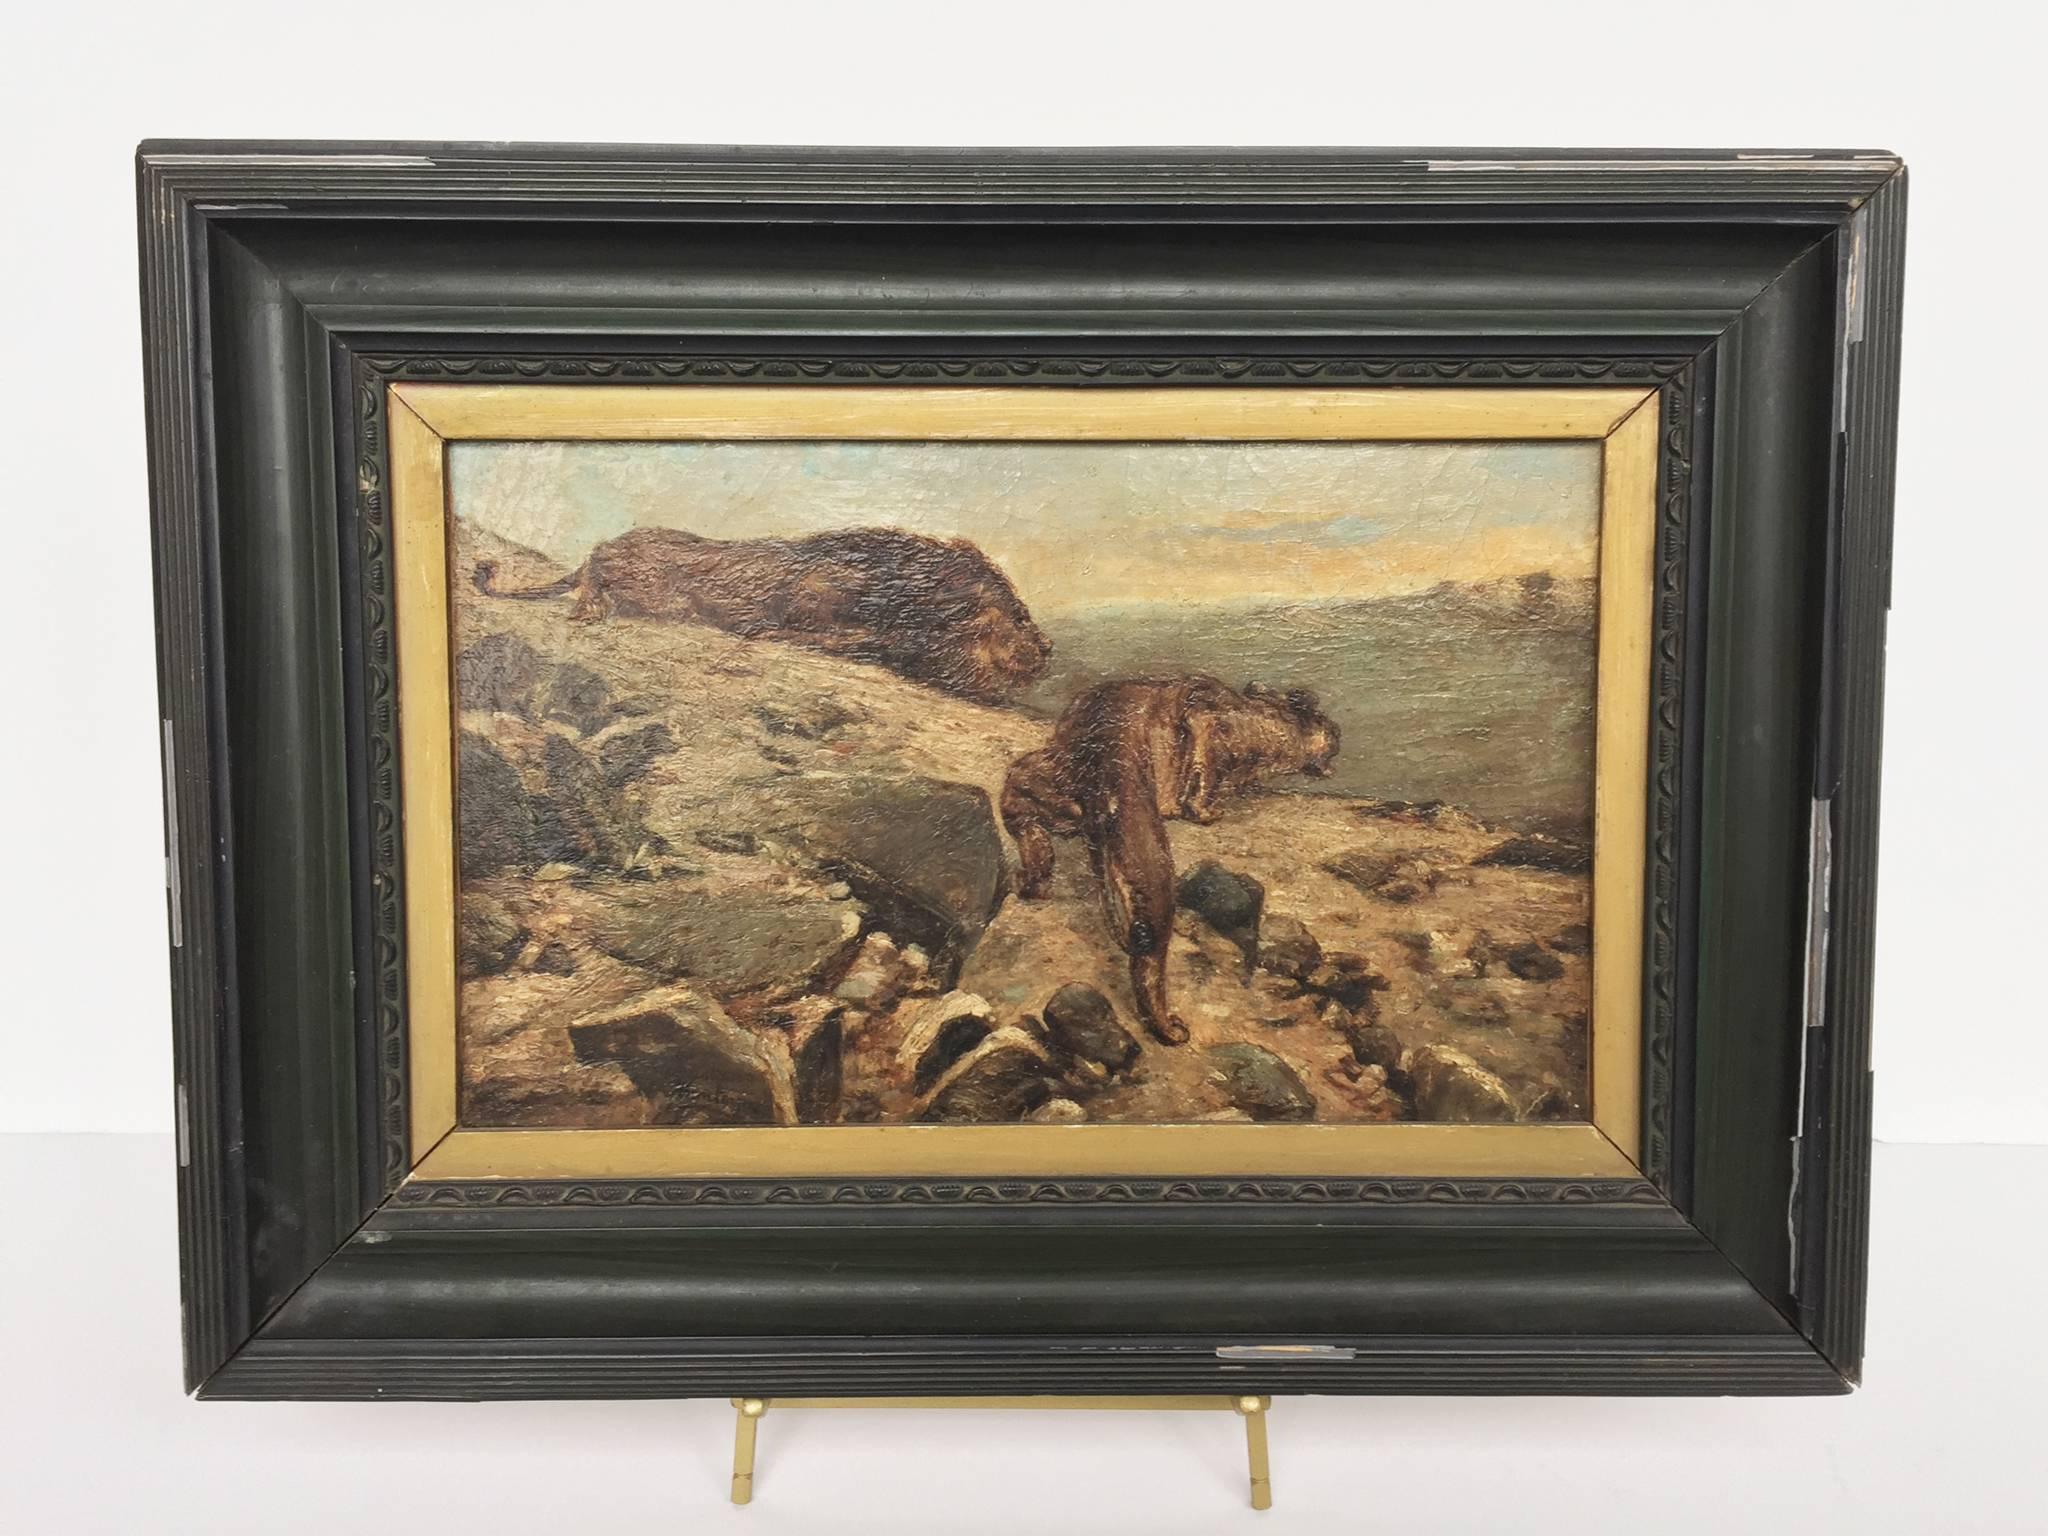 This tense landscape oil painting was completed in the early 20th century. It is signed Montoya at the bottom left. Besides this signature, not much else is known about the painter. The landscape portrays two lions, poised atop a craggy terrain,